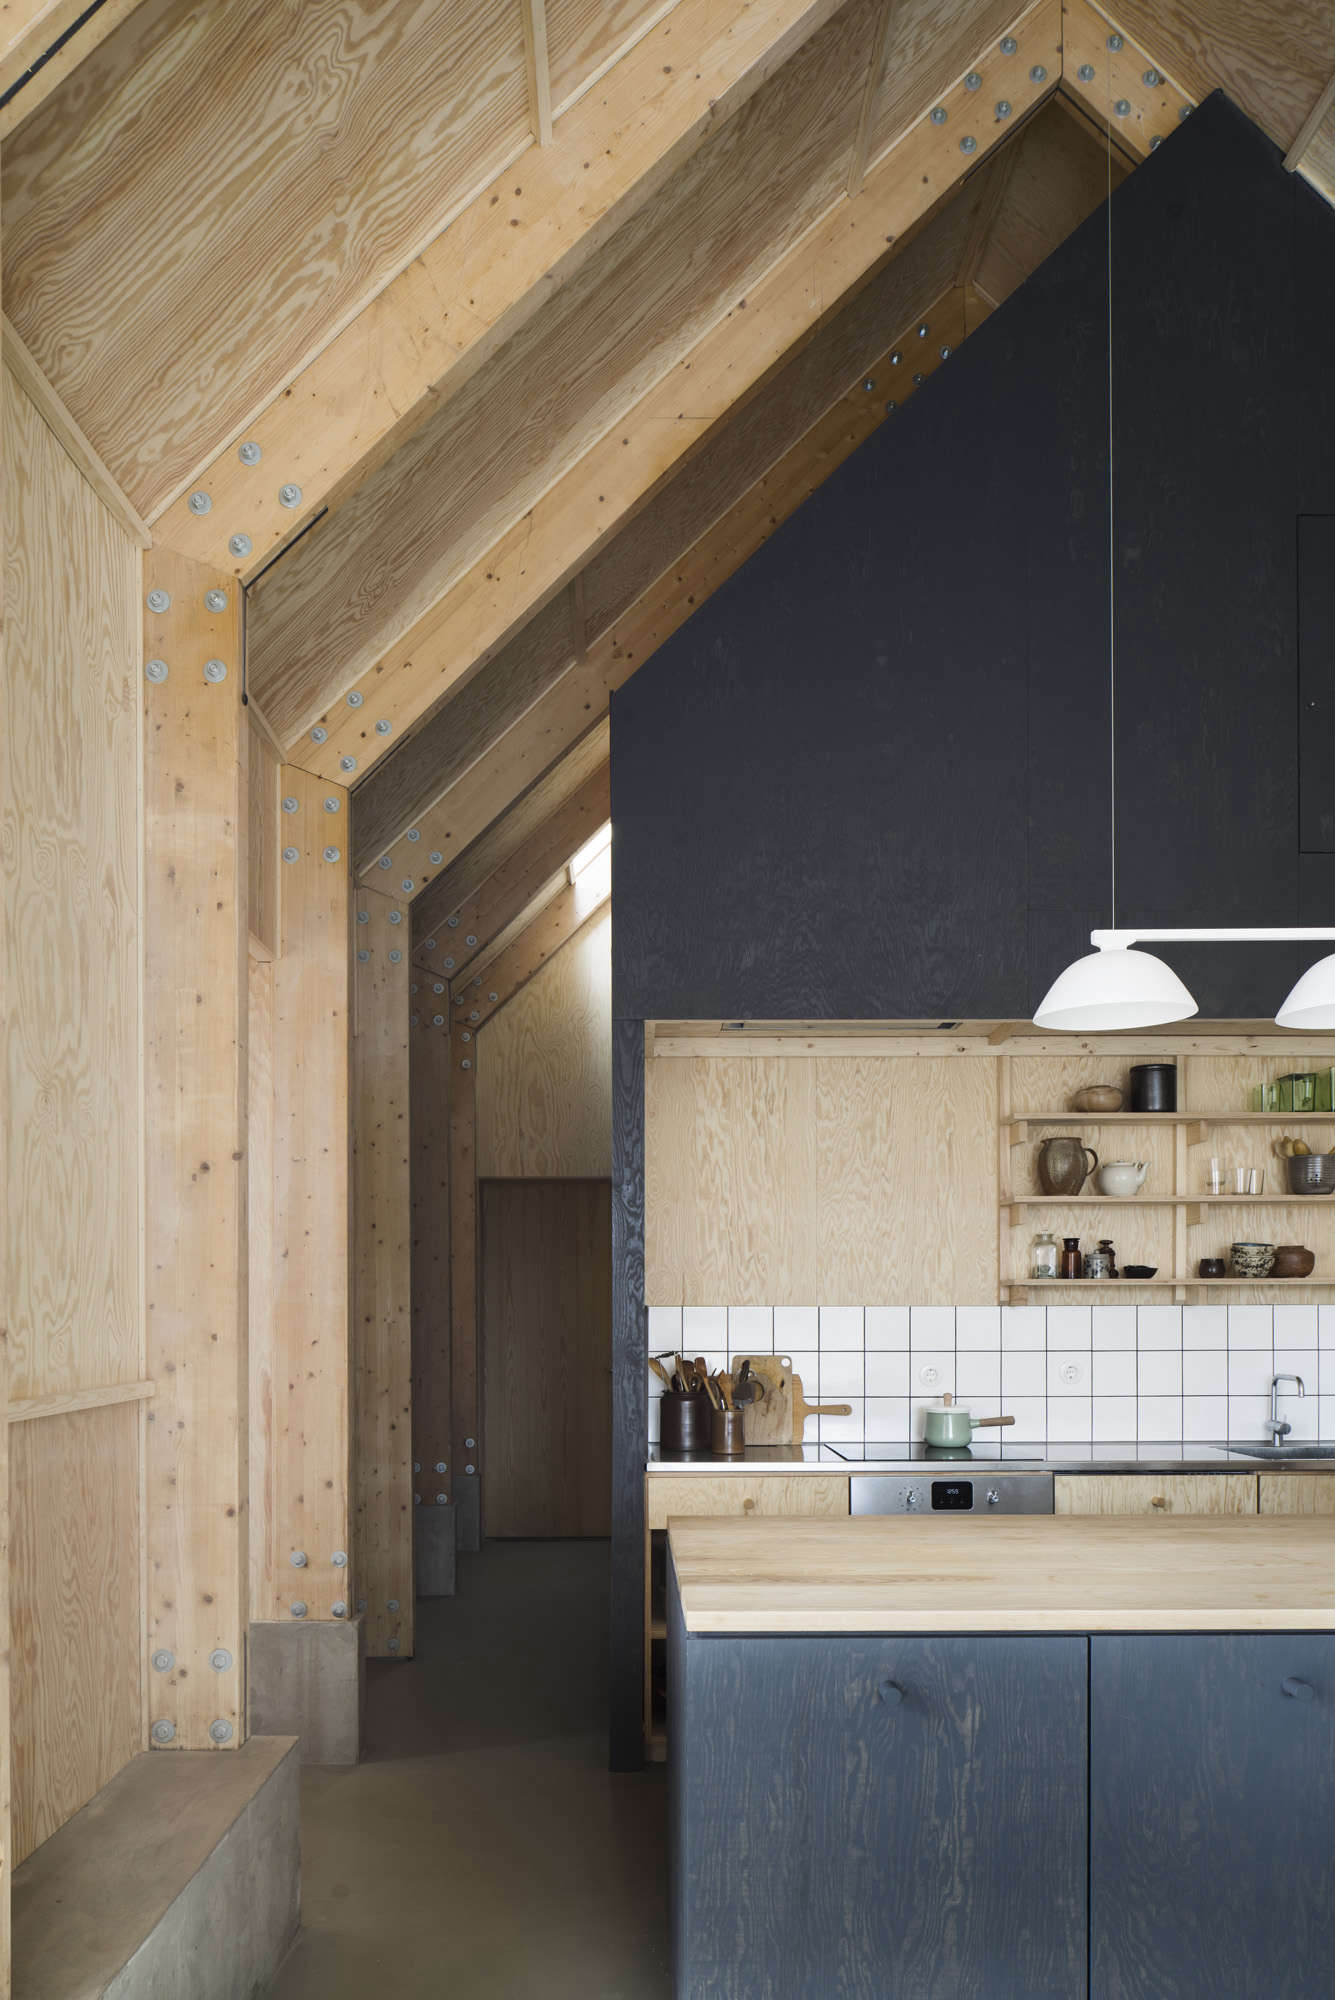 Kitchen of the Week: A Cost-Conscious Kitchen in Sweden